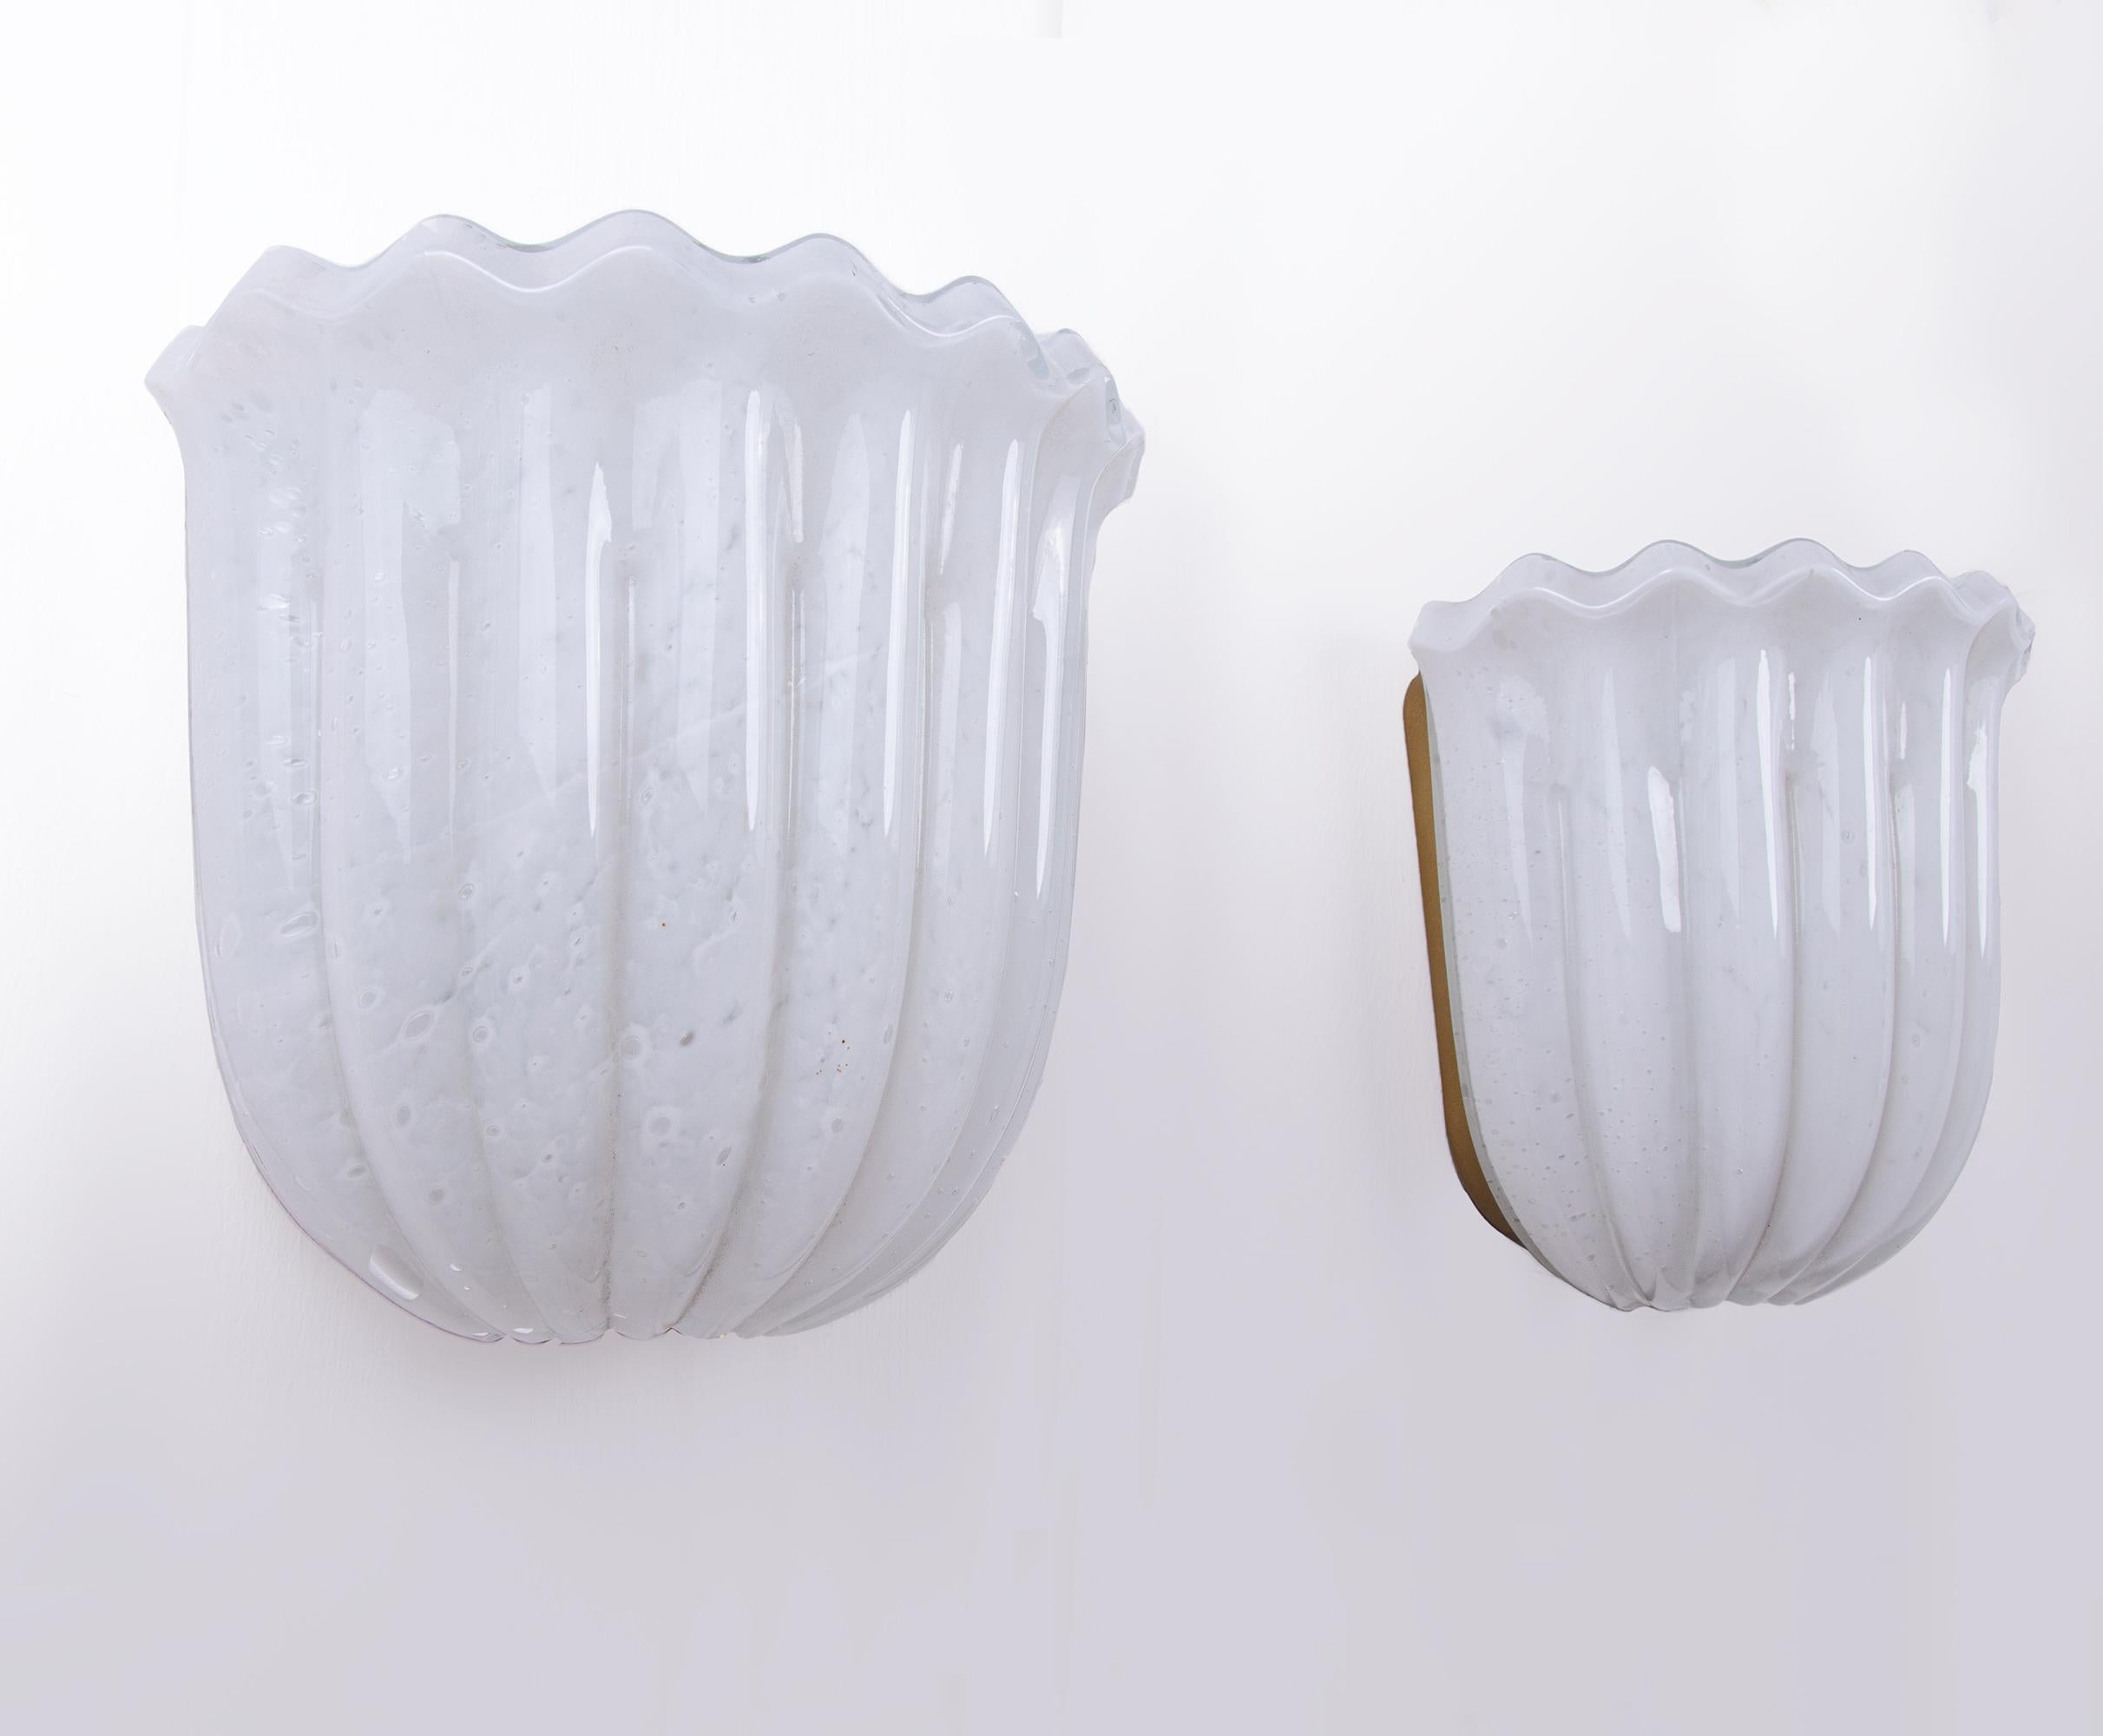 Elegant pair of vintage wall sconces with opaline bubble glass on a metal frame.
Designed and manufactured by Glashütte Limburg in the 1960s in Germany.
Measures: width 8.66